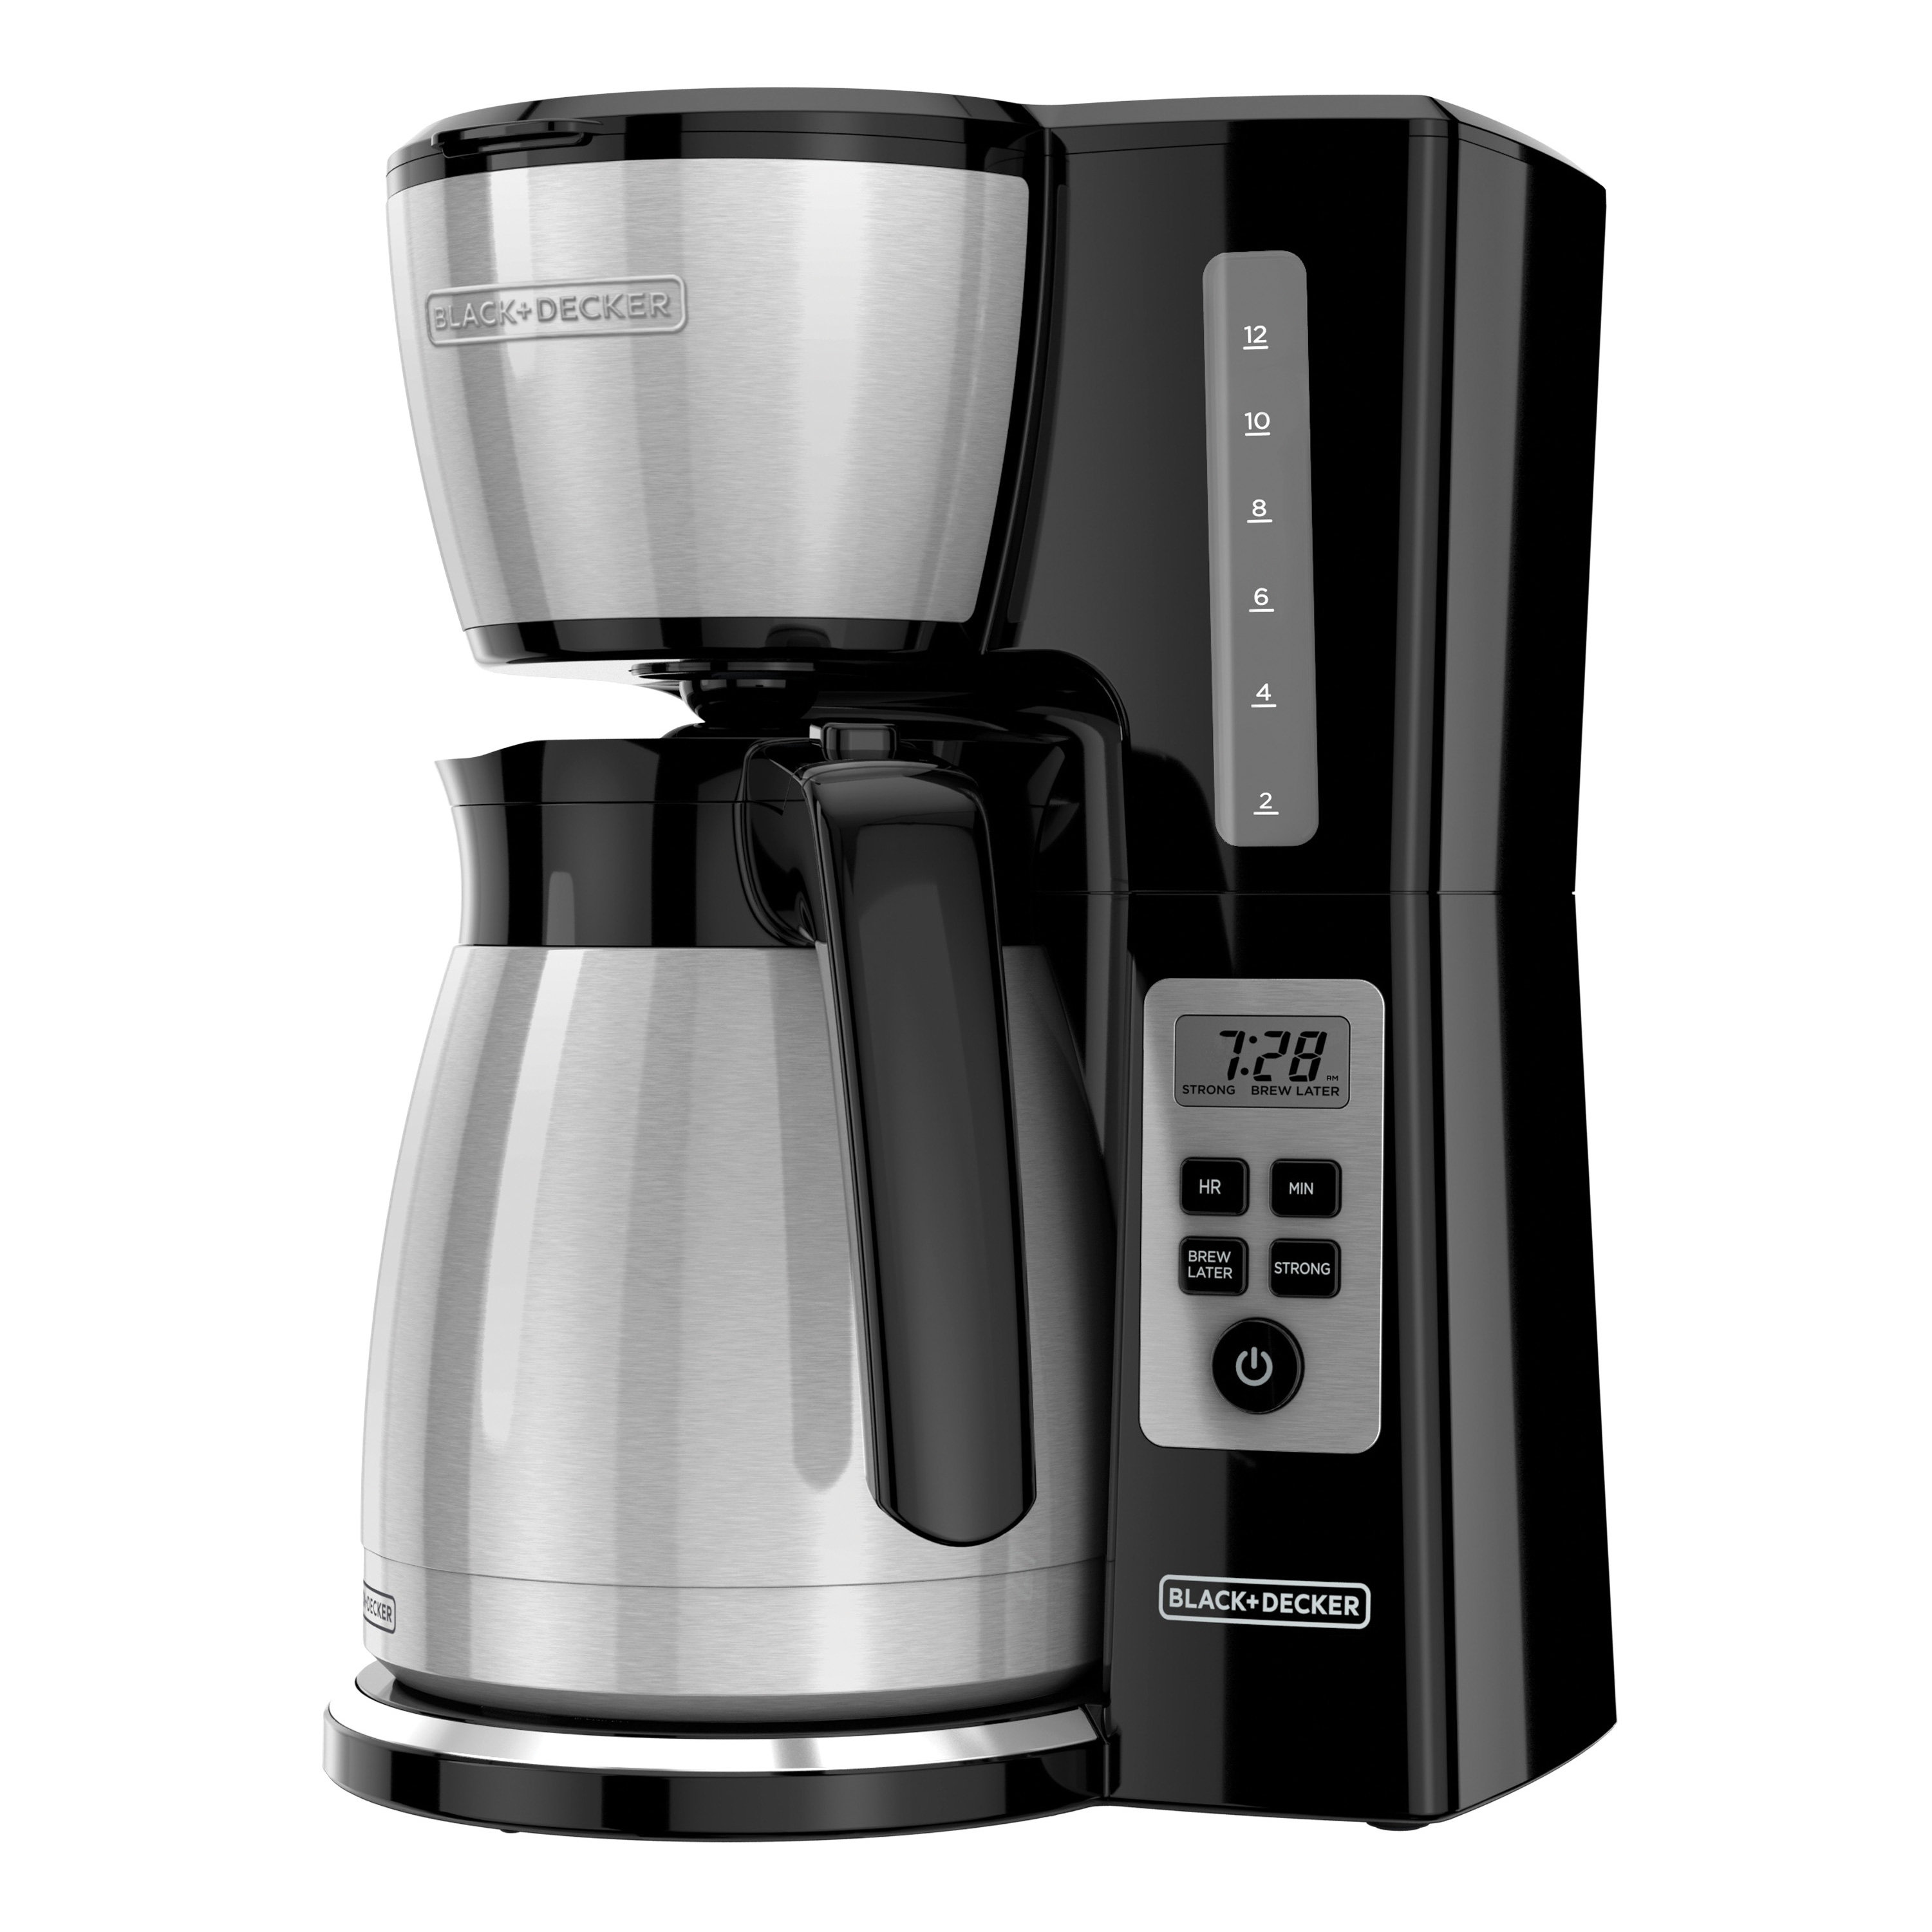 Black + Decker BLACK+DECKER 12 Cup Thermal Programmable Coffee Maker With  Brew Strength And VORTEX Technology, Black/Steel & Reviews